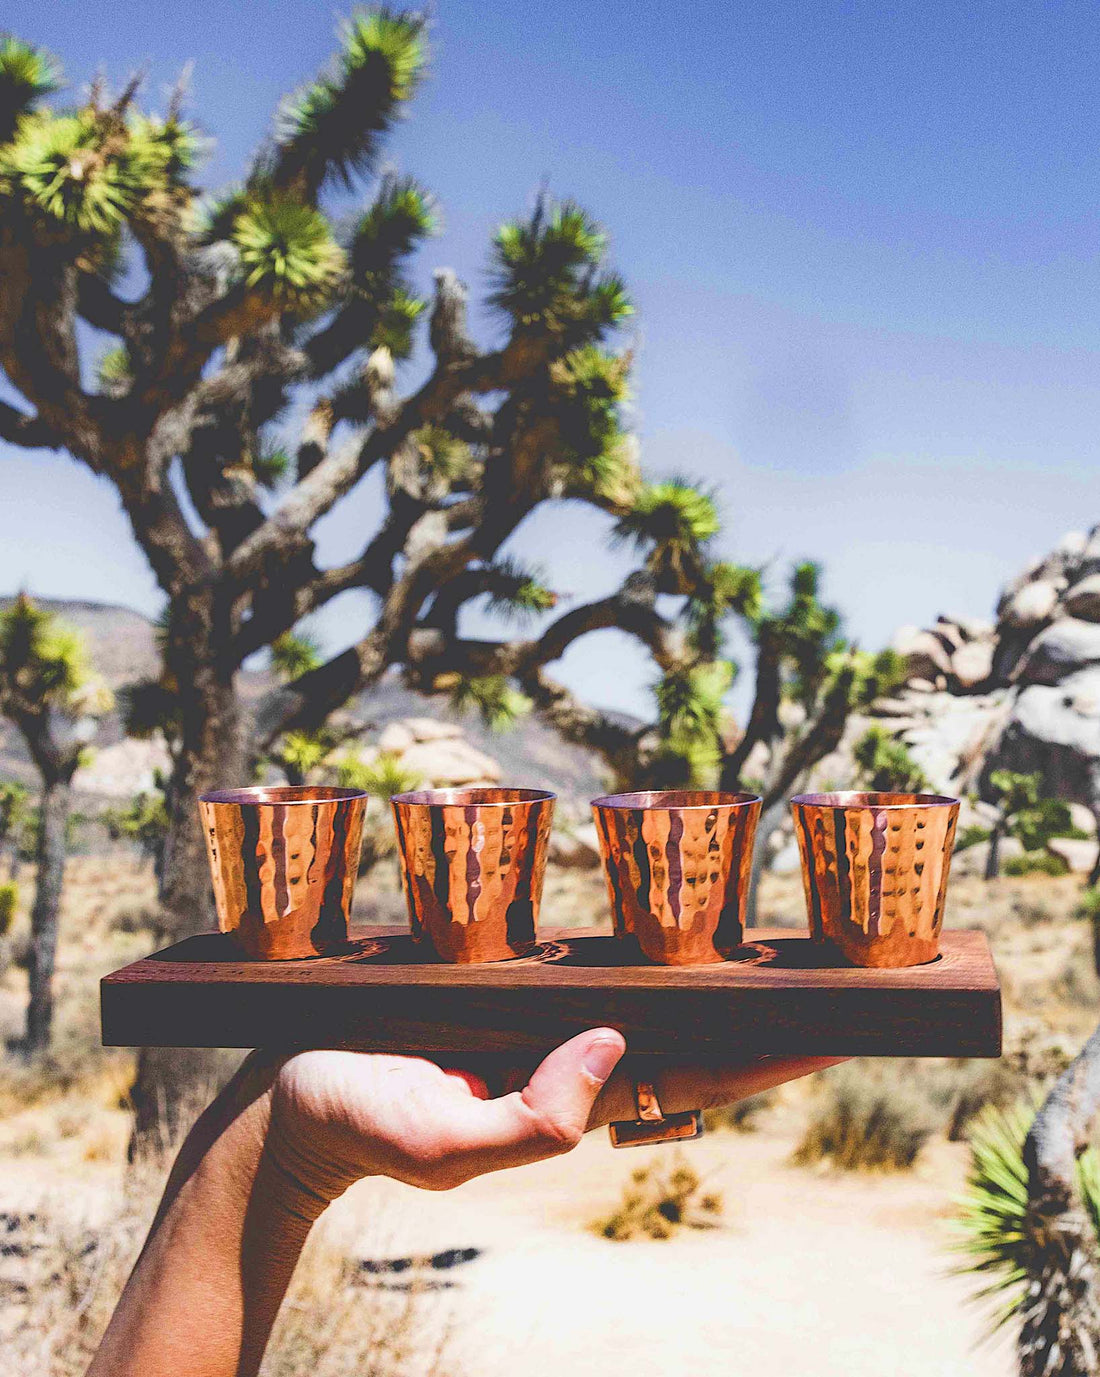 Hammered copper shot glasses on wooden board with Joshua tree in background